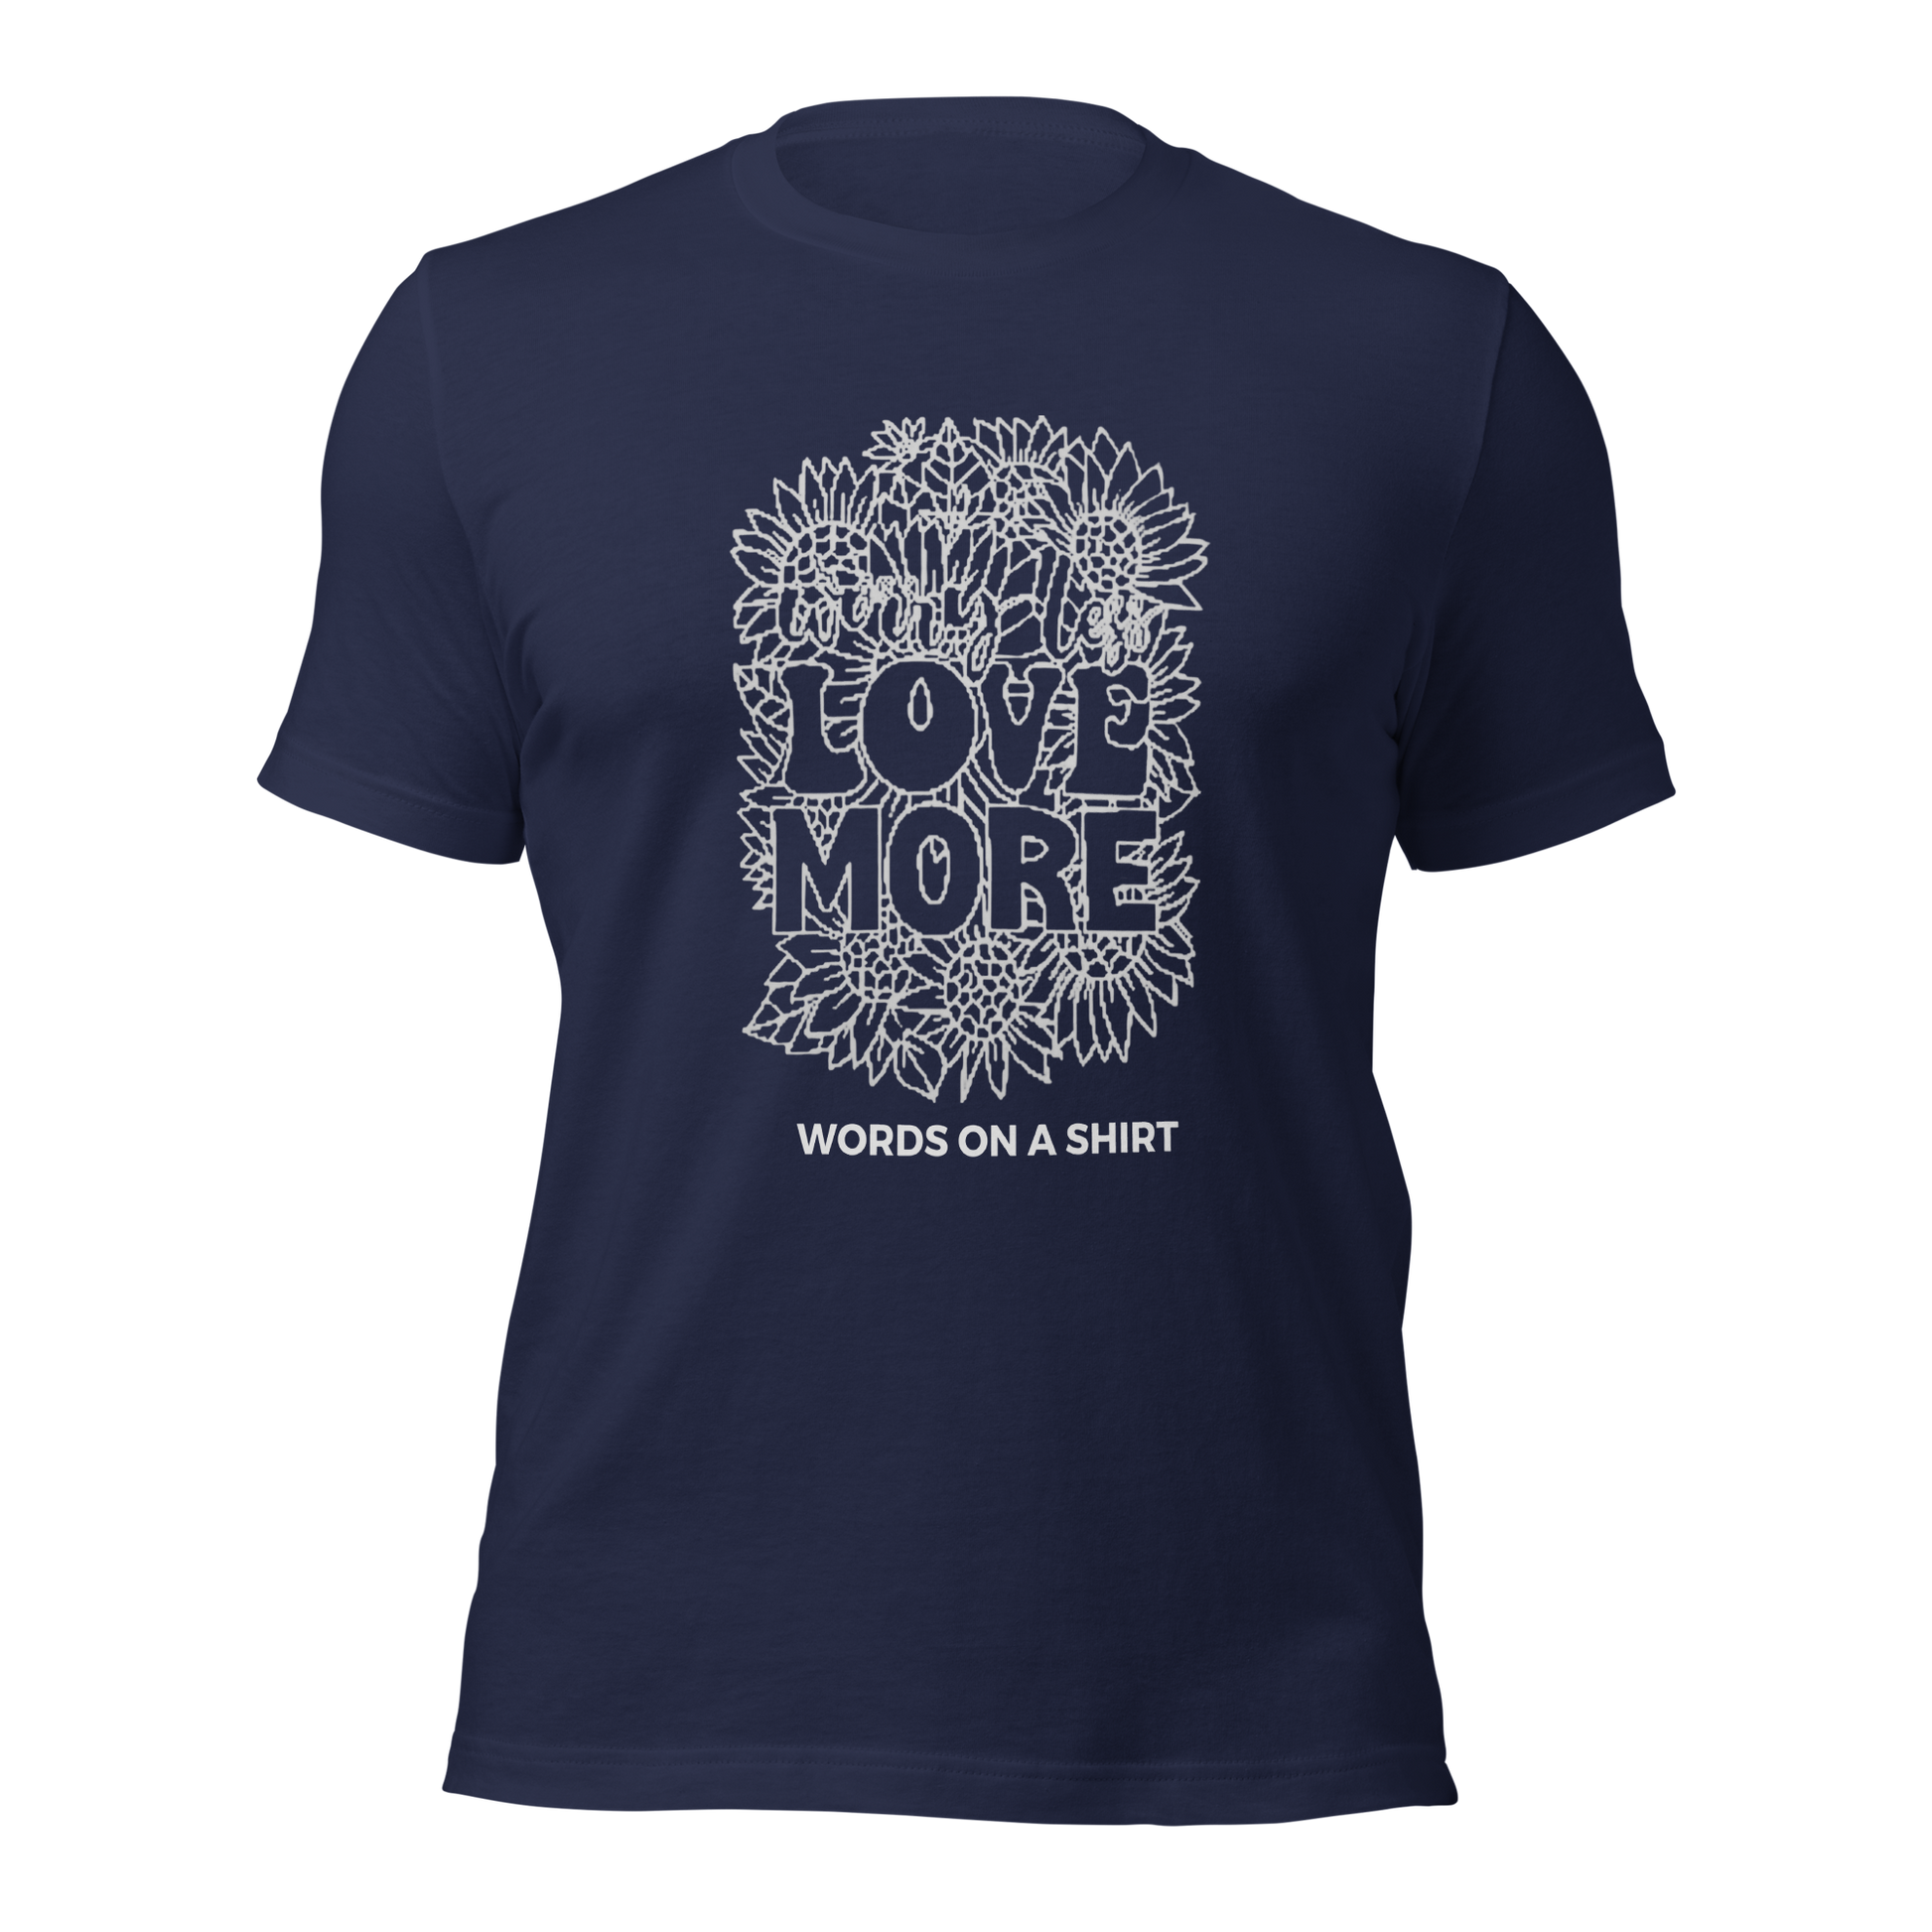 T-shirts are abundant, but this one is exceptional. Its fabric is incredibly soft, breathable, and offers the perfect amount of stretch. Need we elaborate? The world needs more love!